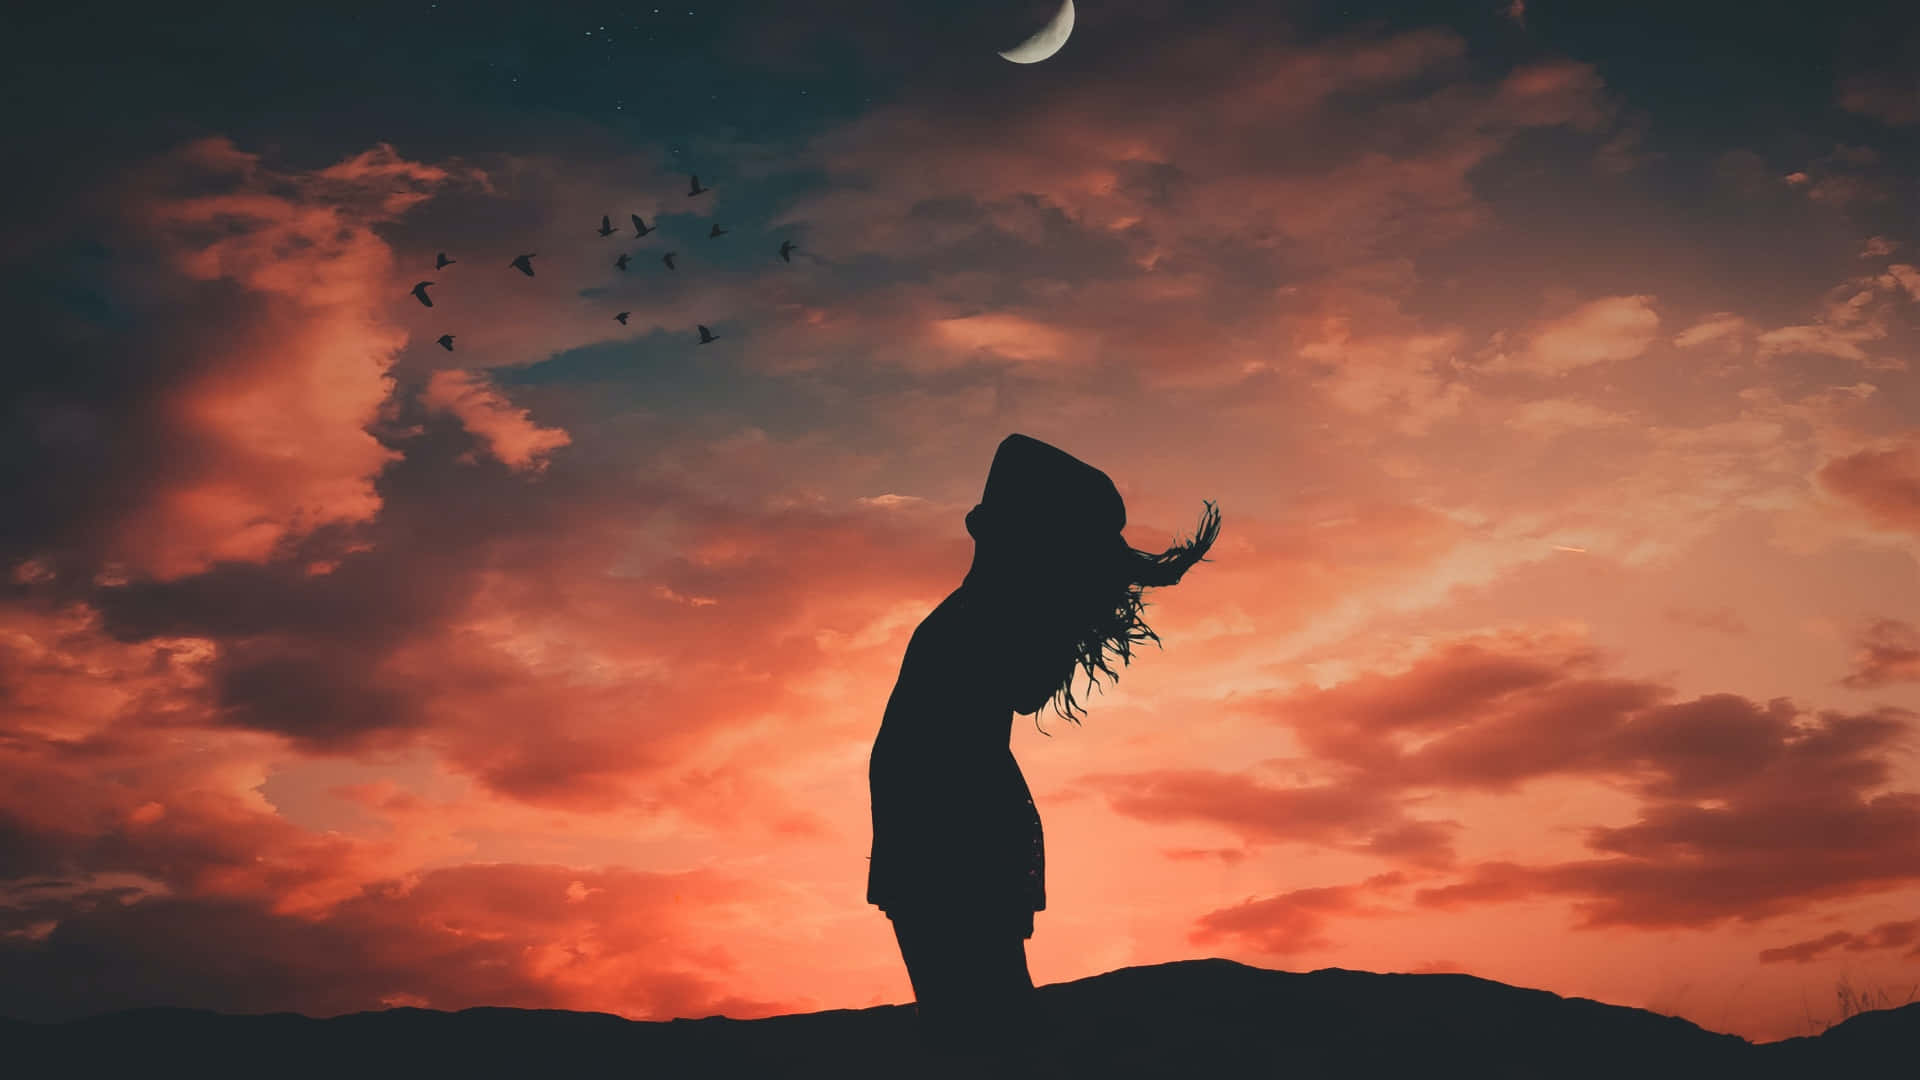 Silhouette Of Woman Under Evening Sky Wallpaper